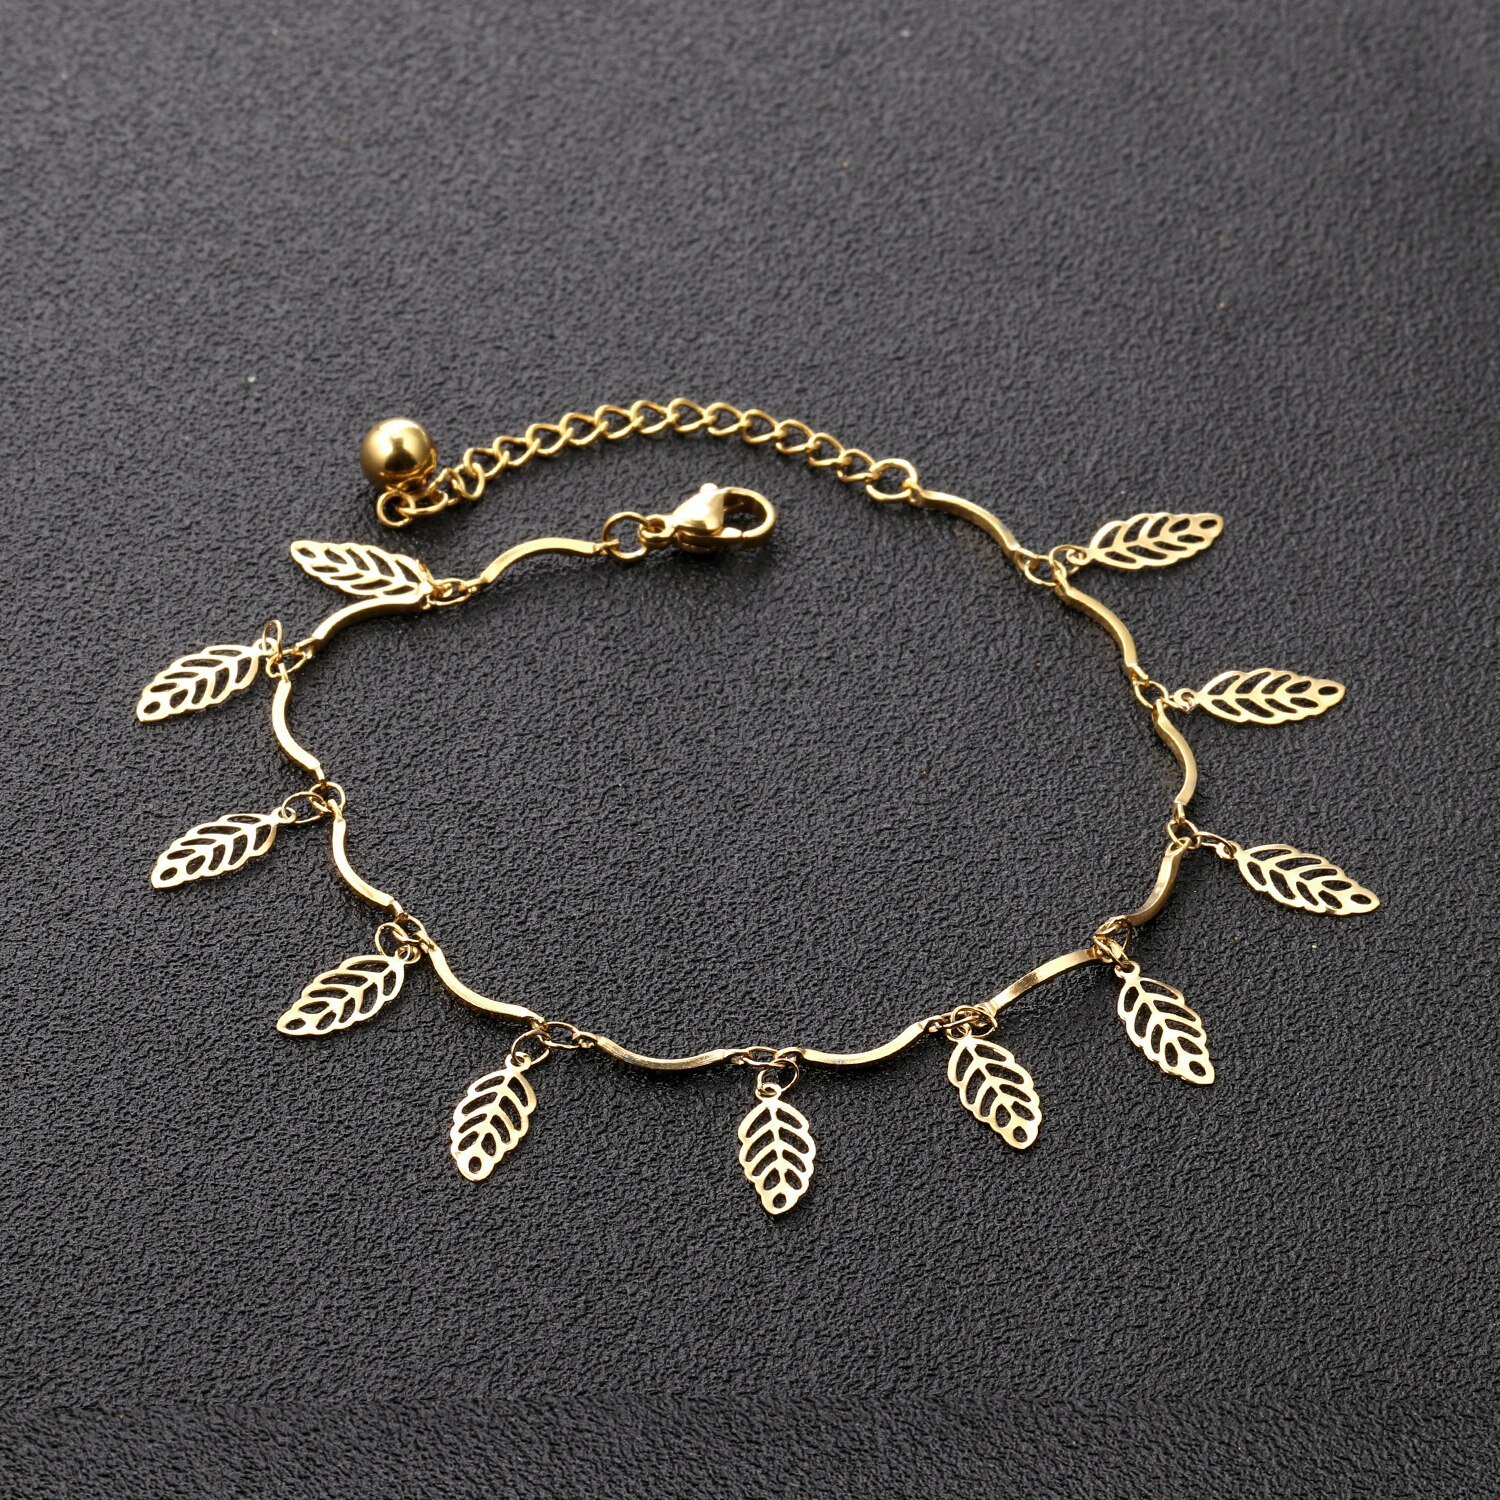 LOLA – Stainless Steel Leaf Chains Anklet Anklets 8d255f28538fbae46aeae7: Gold